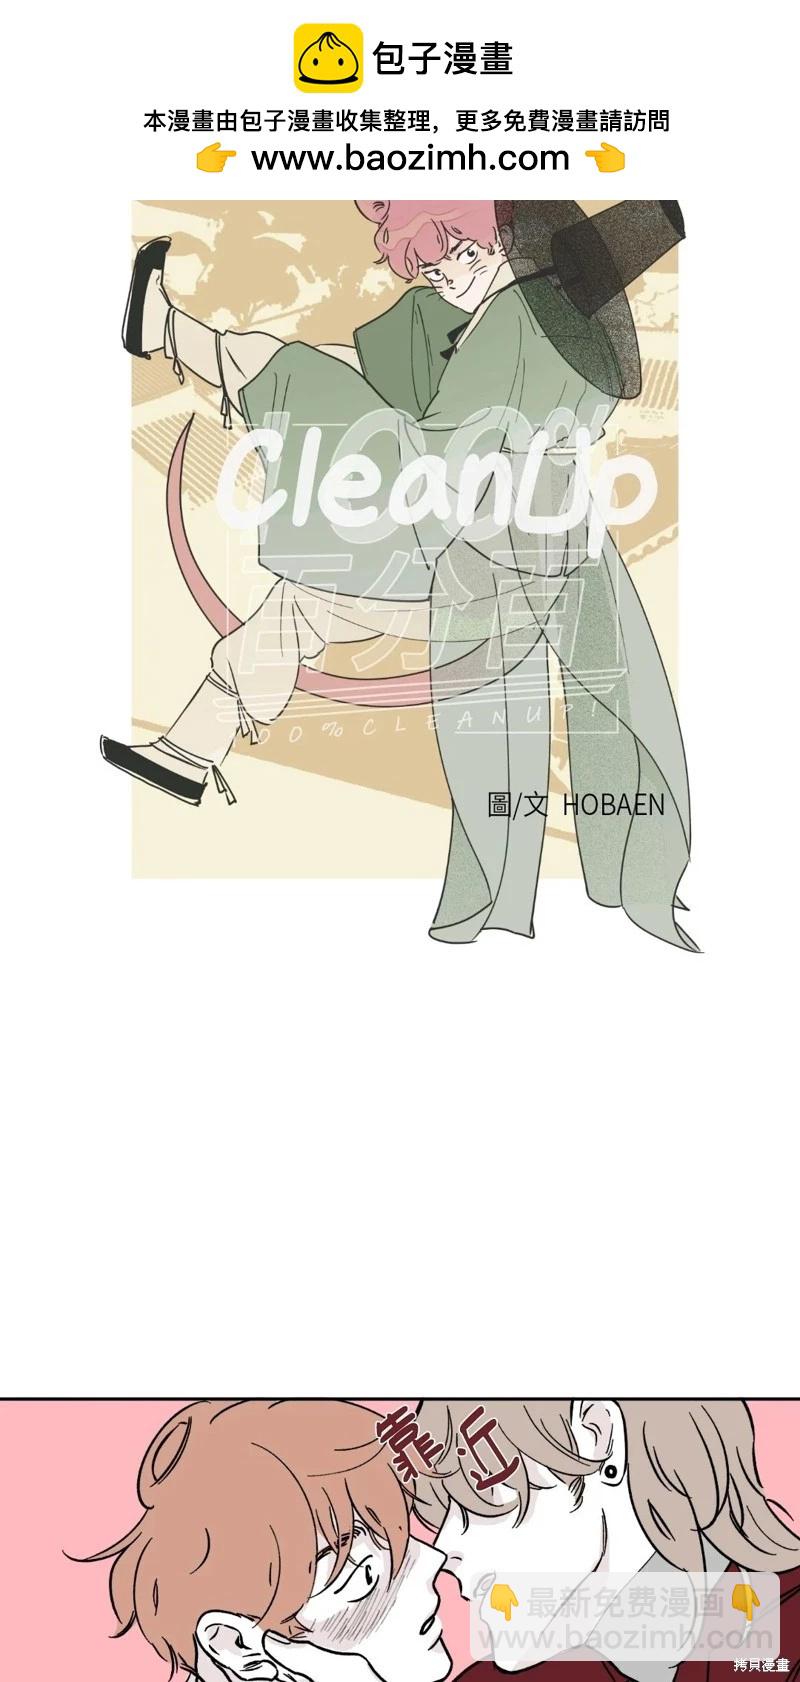 Clean Up百分百 - 第09話 - 2